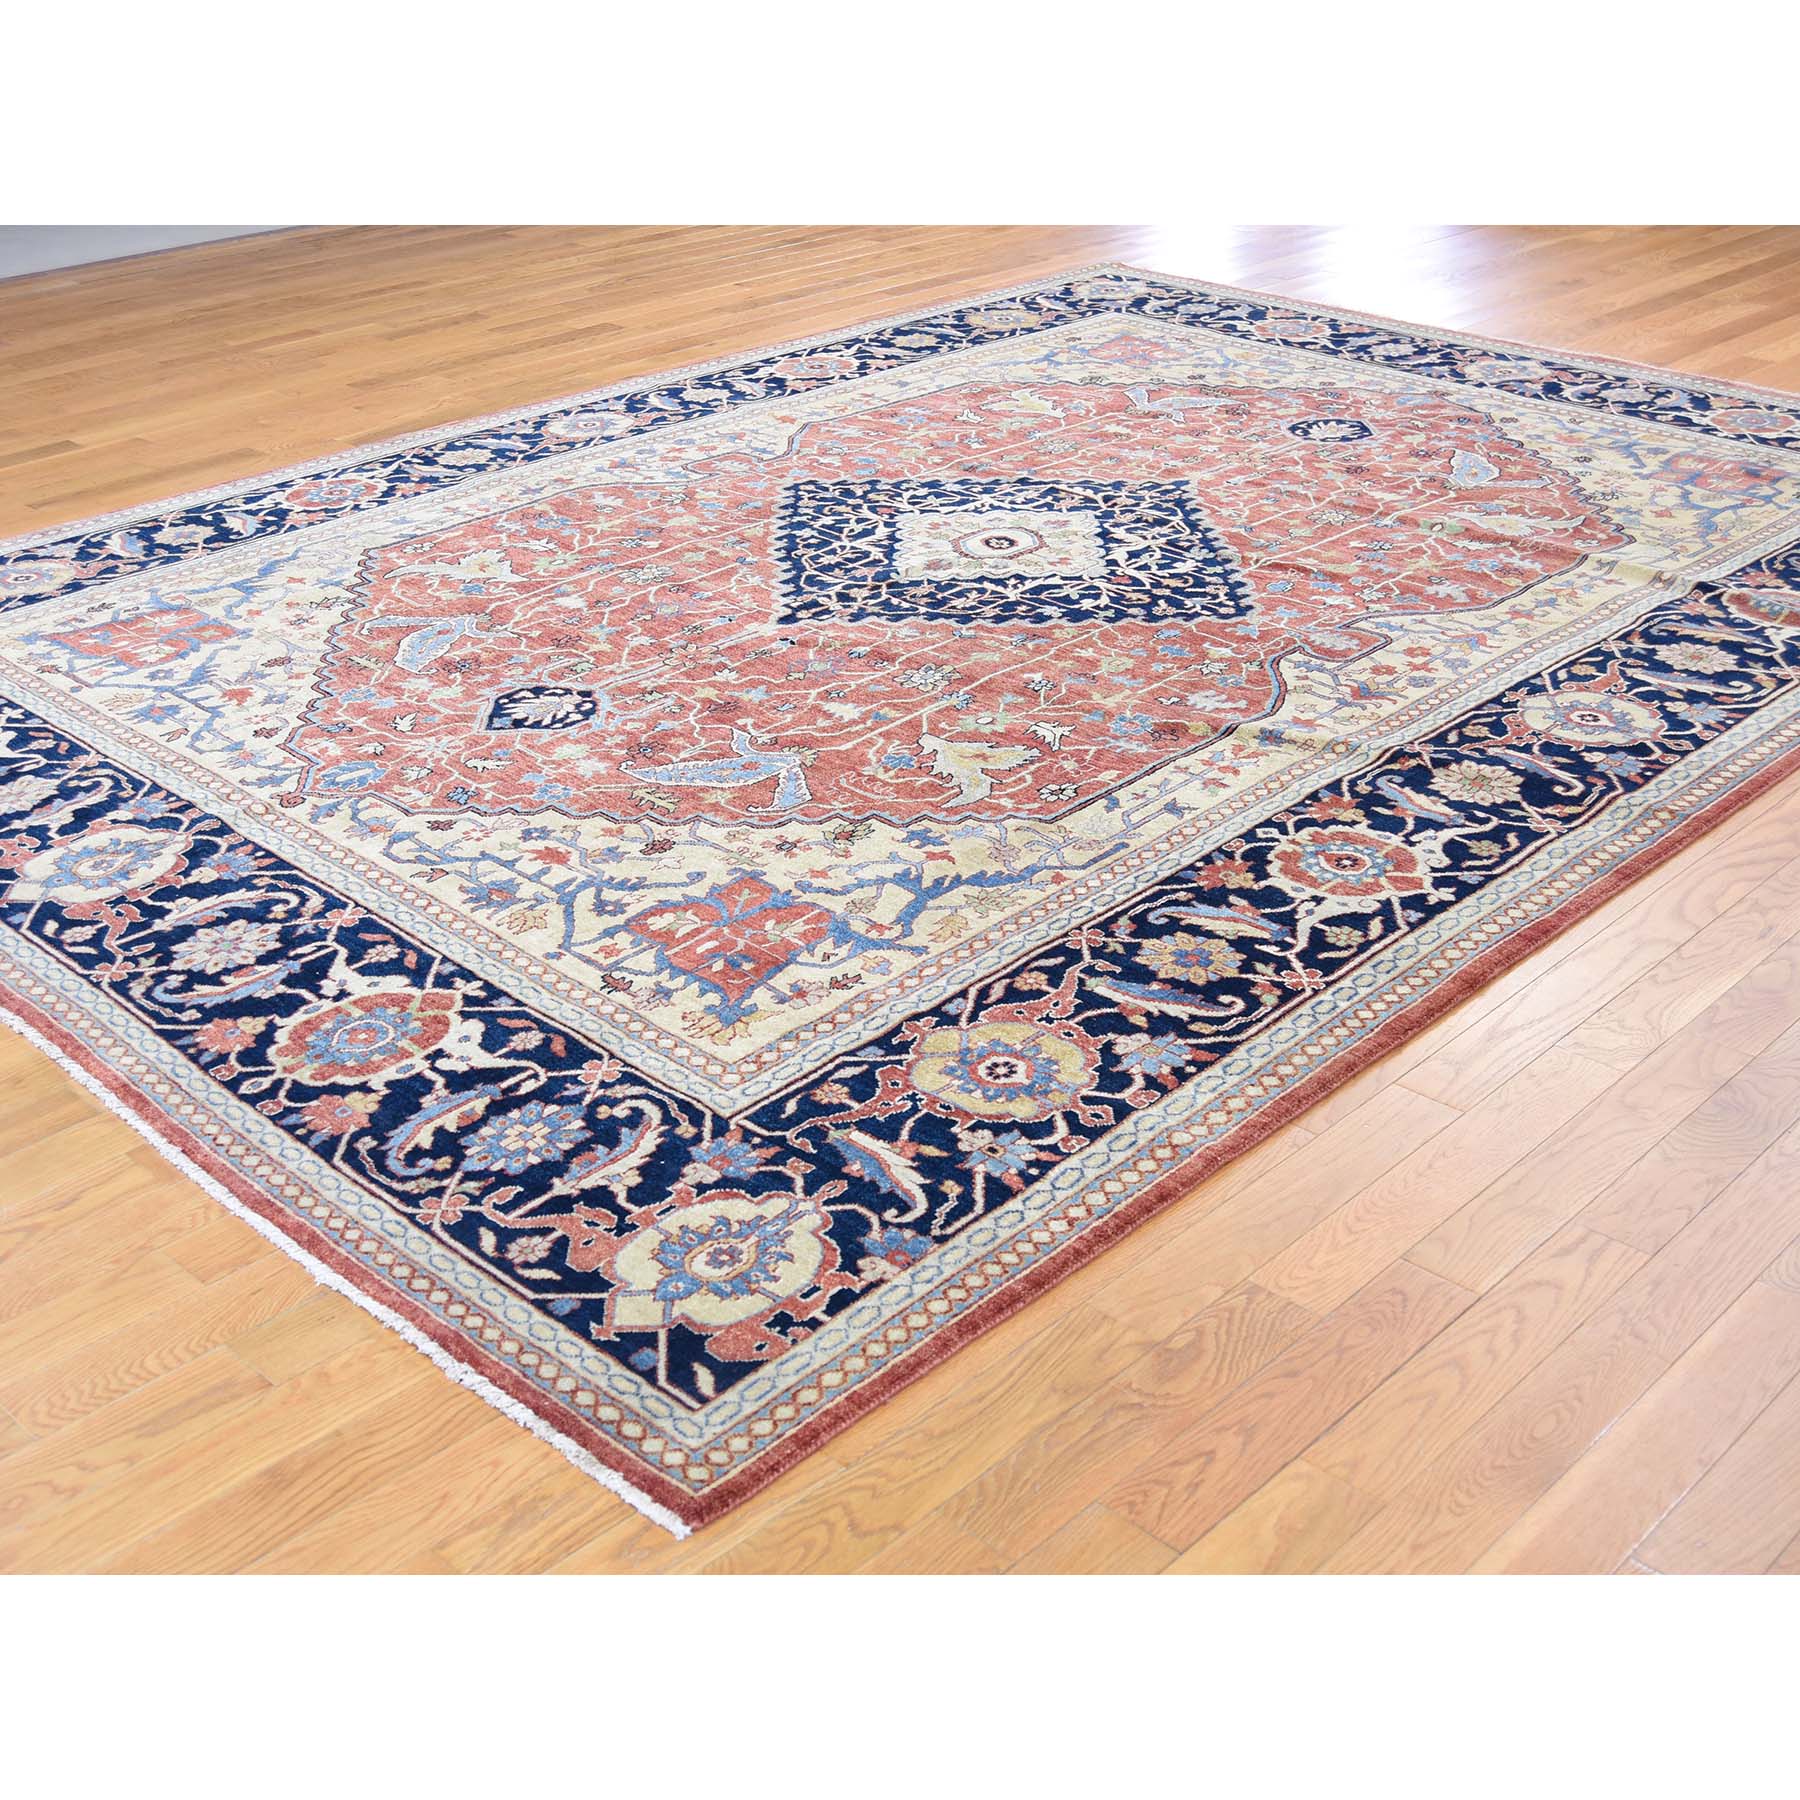 8-10 x 12- Antiqued Heriz Re-creation Pure Wool Hand Knotted Oriental Rug 